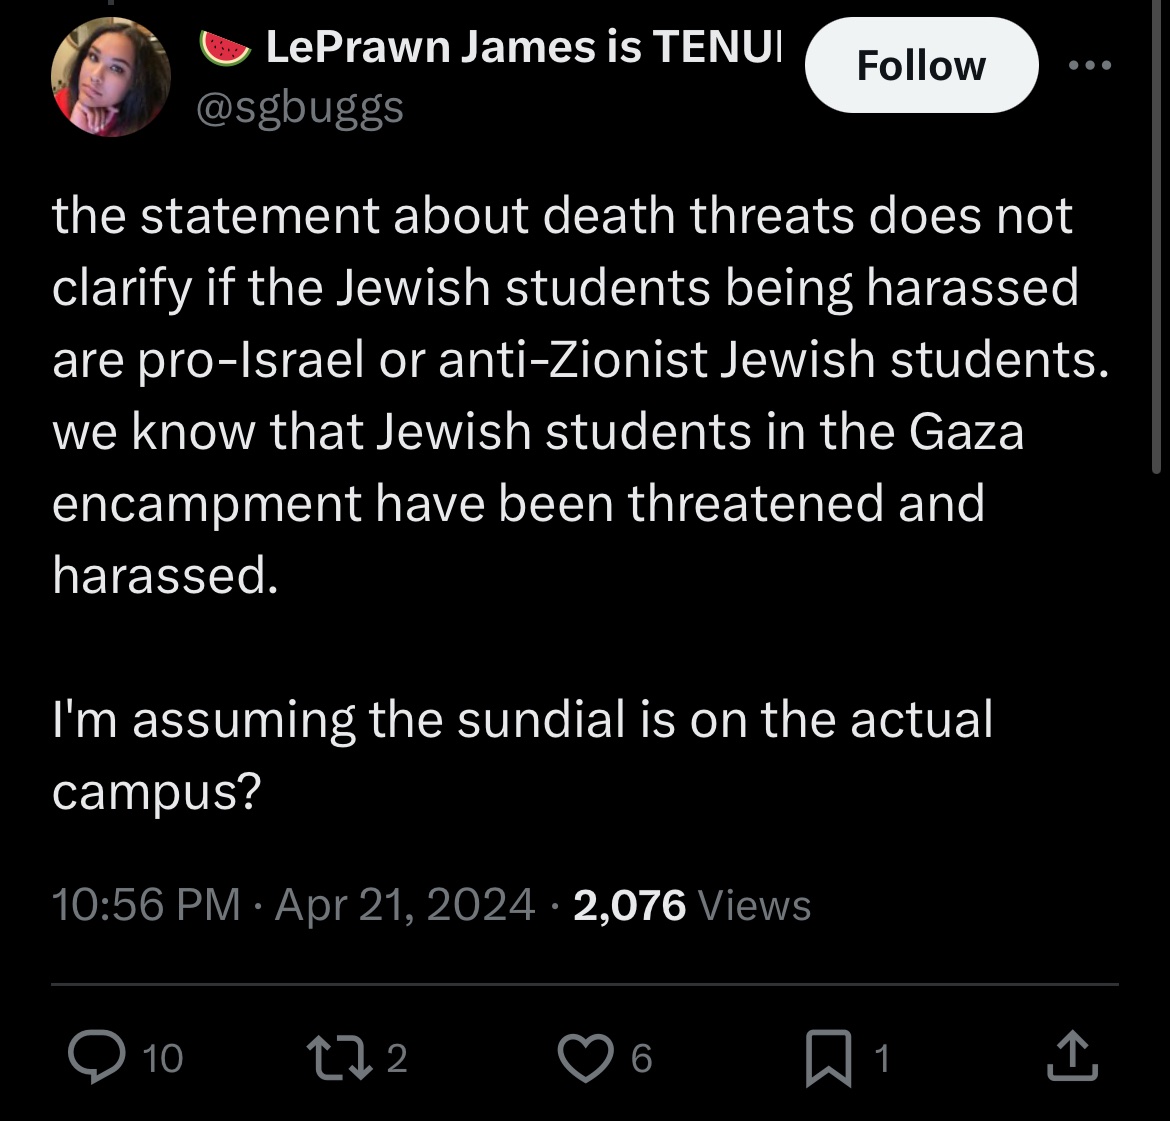 Now maybe I’m crazy, but I don’t think Jews should be killed at all, even if they have political opinions you deem unacceptable. These folks sound an awful lot like the leaders of the USSR when they persecuted Jews in the name of “anti-Zionism.”